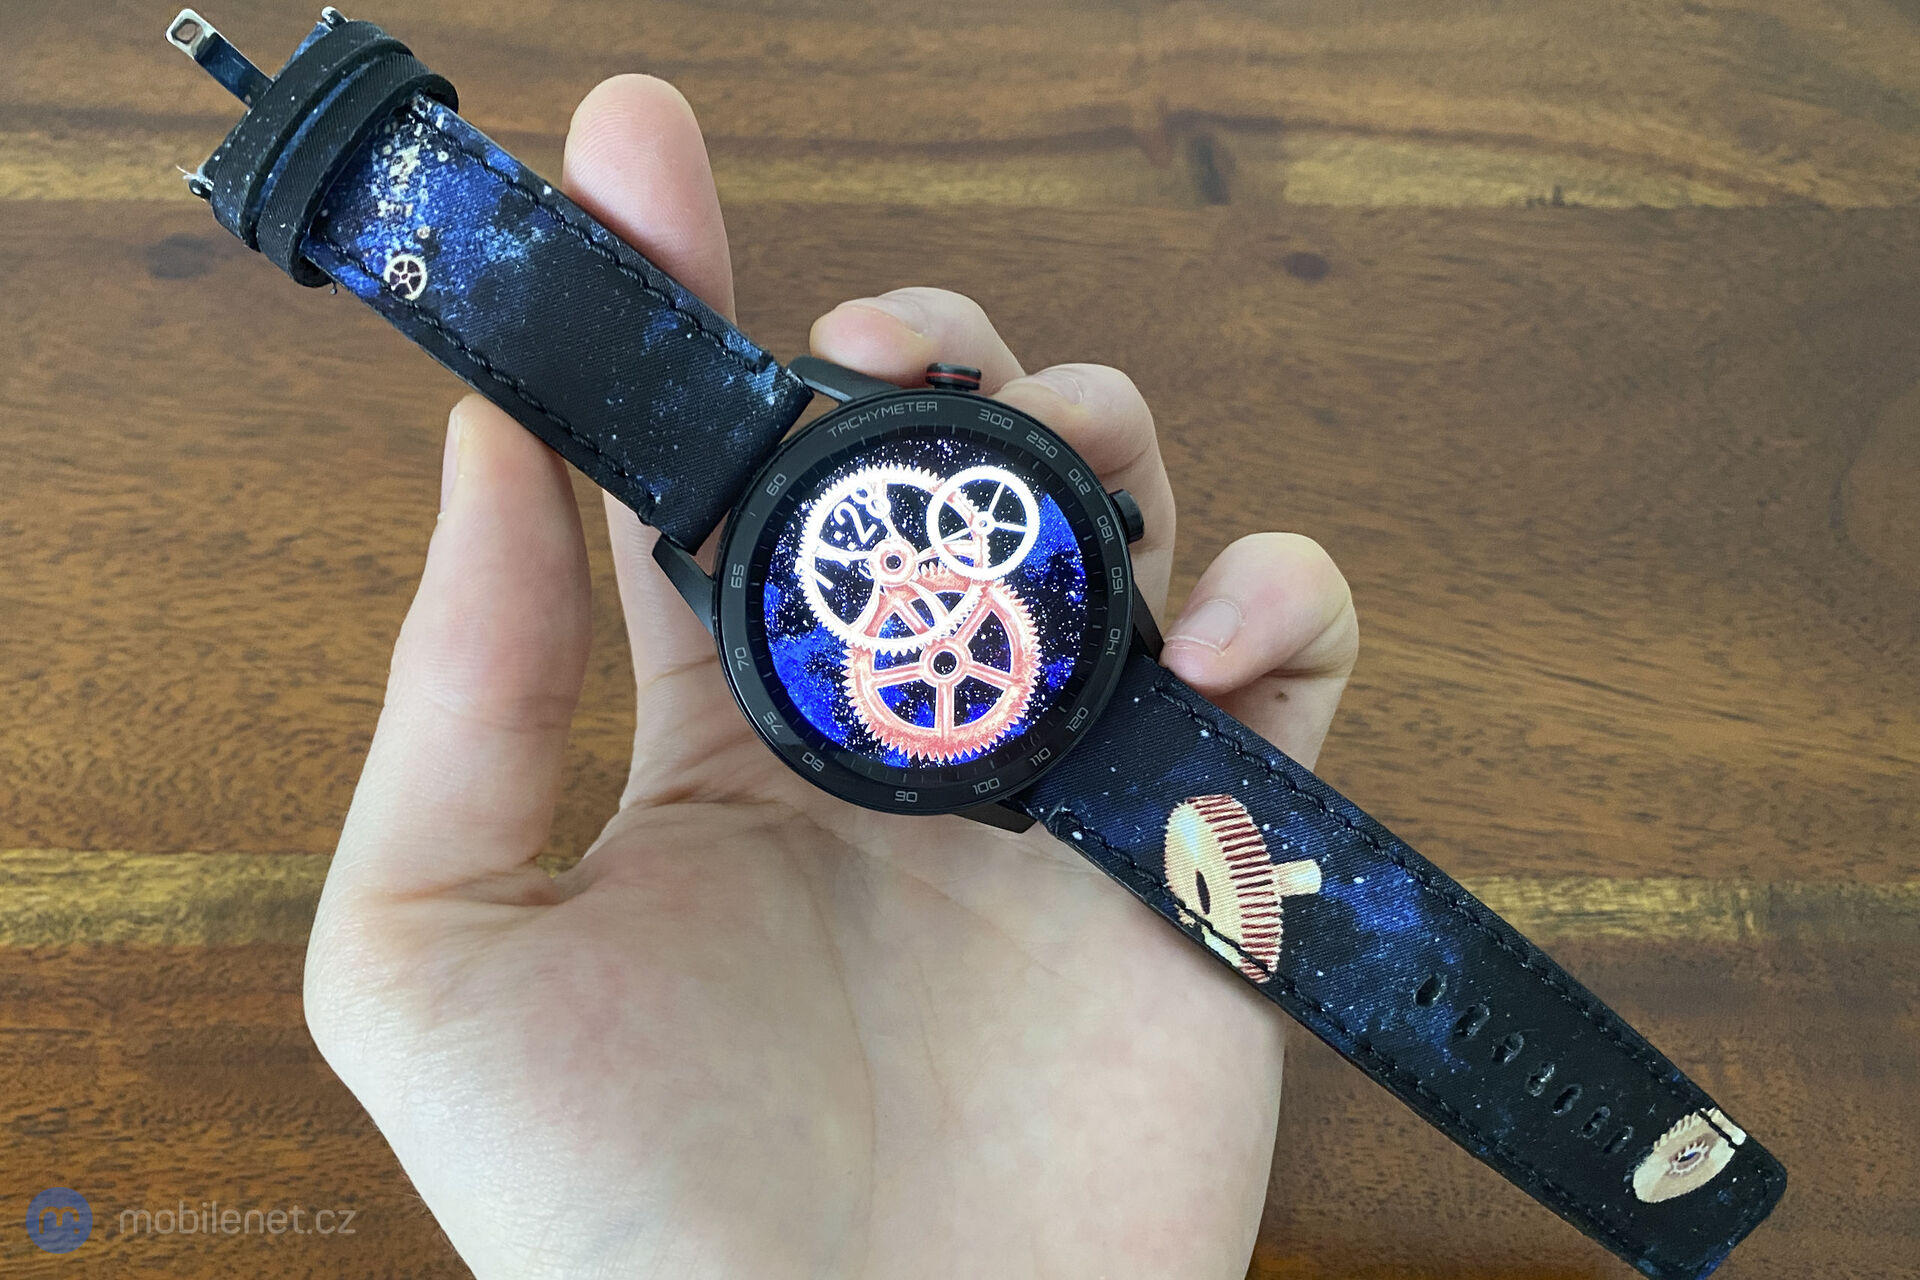 Honor MagicWatch 2